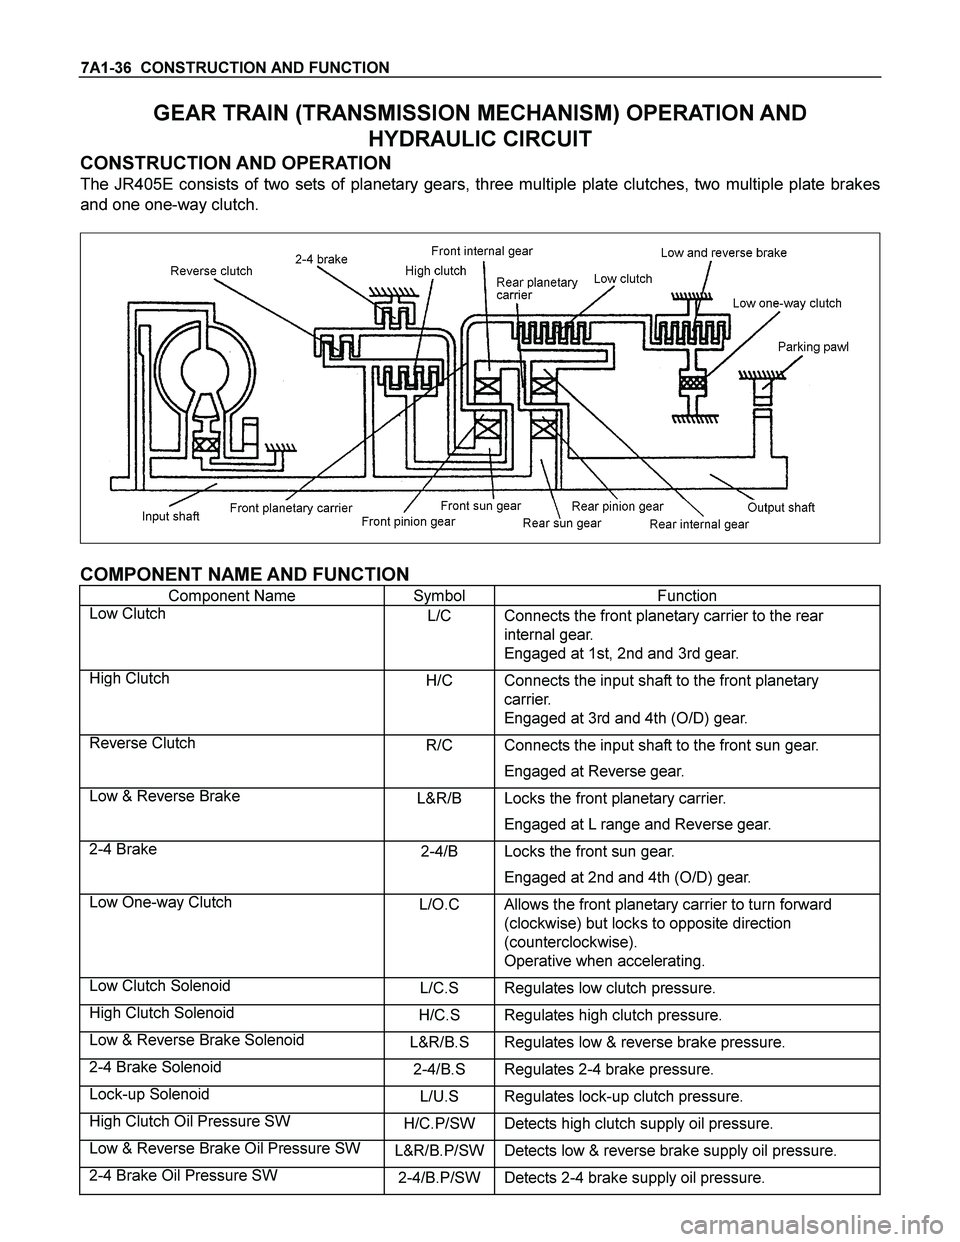 ISUZU TF SERIES 2004  Workshop Manual 7A1-36  CONSTRUCTION AND FUNCTION 
GEAR TRAIN (TRANSMISSION MECHANISM) OPERATION AND  
HYDRAULIC CIRCUIT 
CONSTRUCTION AND OPERATION 
The JR405E consists of two sets of planetary gears, three multiple